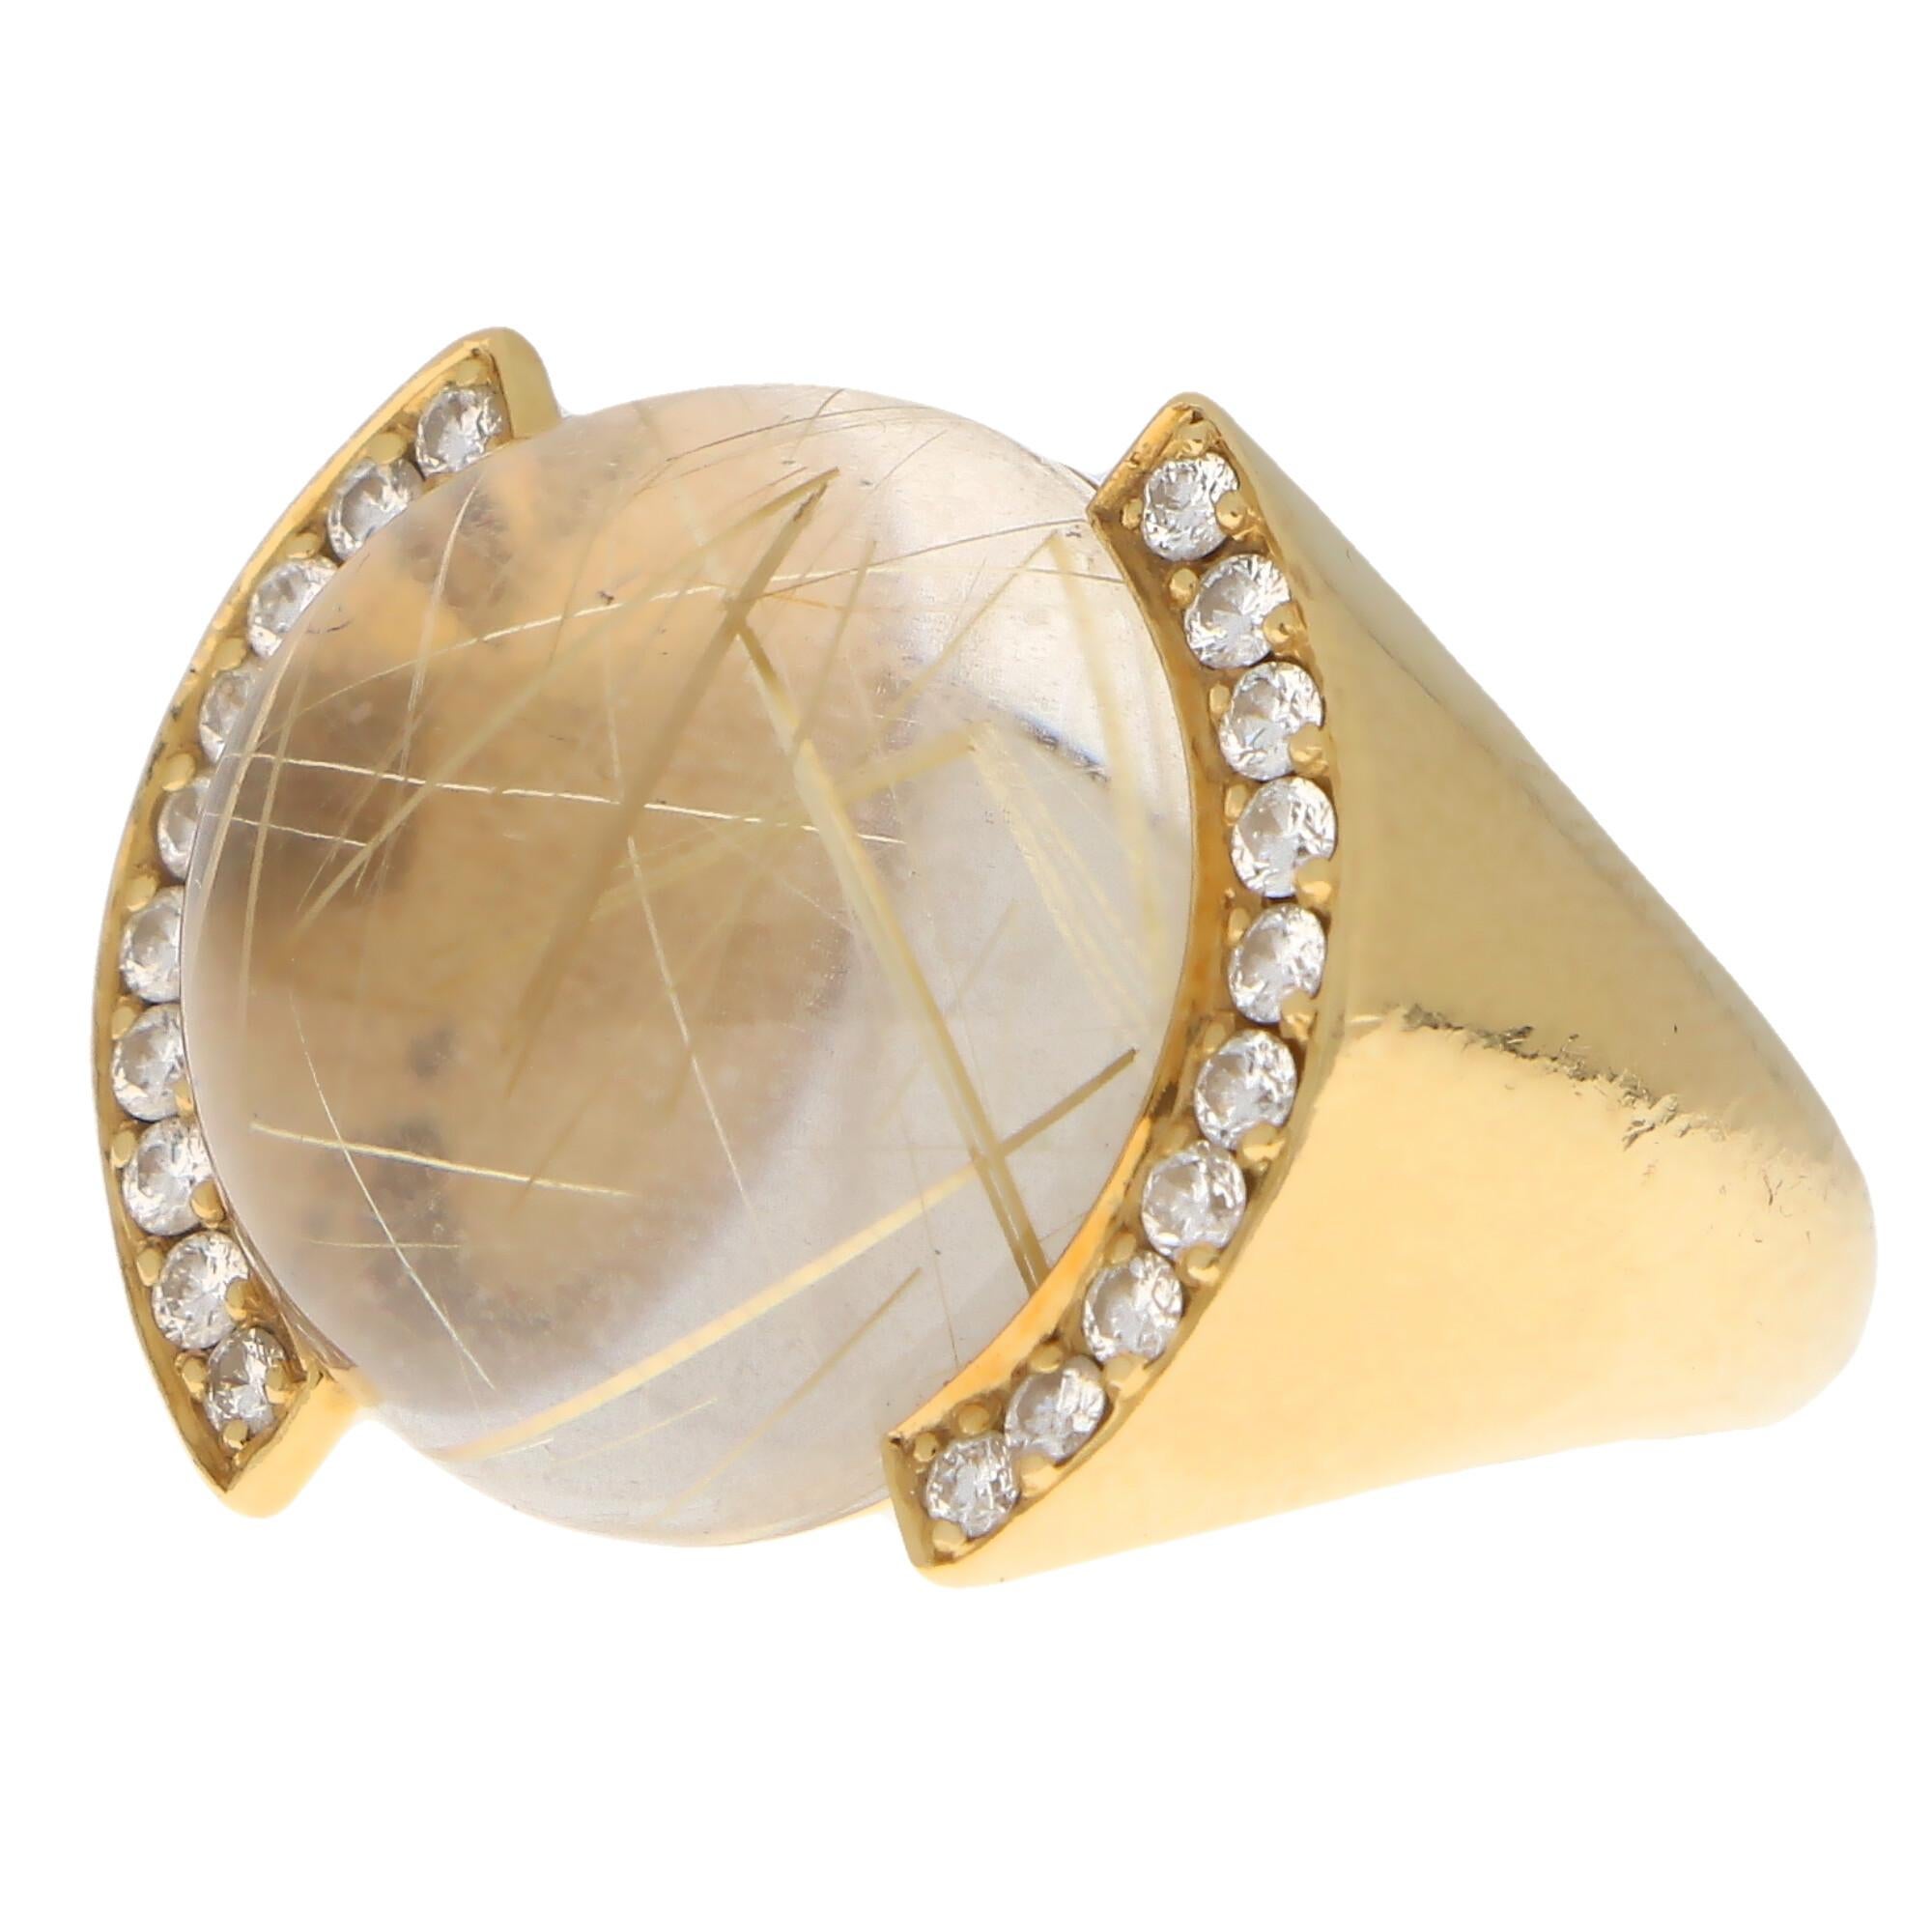 An extremely unique Cartier rutilated quartz and diamond bombe ring set in 18k yellow gold.

The ring is designed as a bombe style and is predominantly set with a round cabochon piece of rutilated quartz. This rutilated quartz has a fantastic array